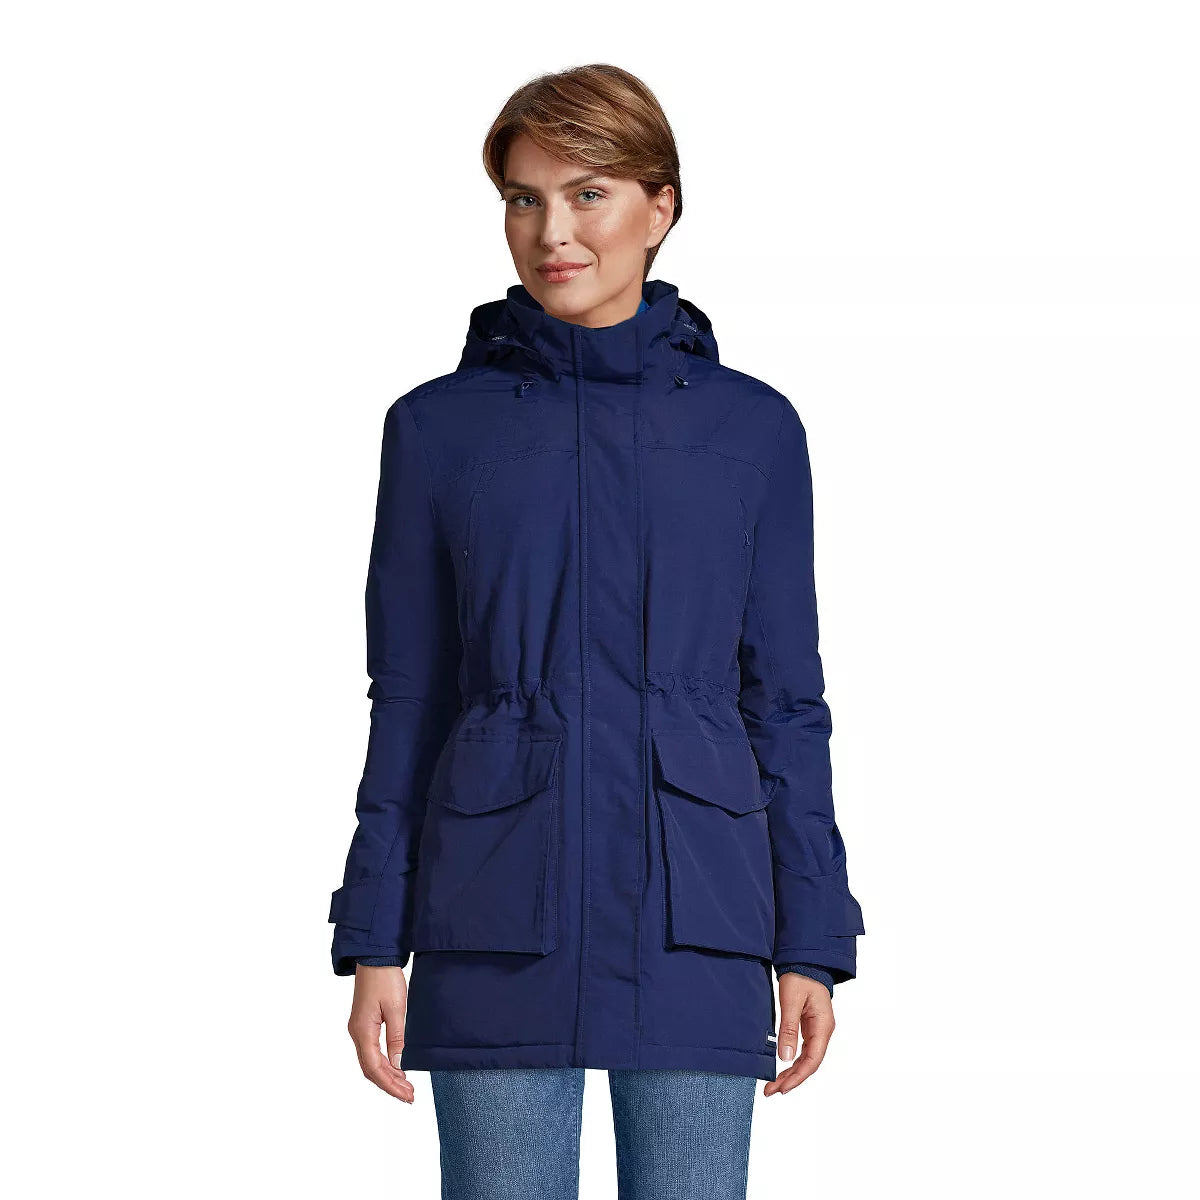 Lands' End Ladies' Squall Winter Parka